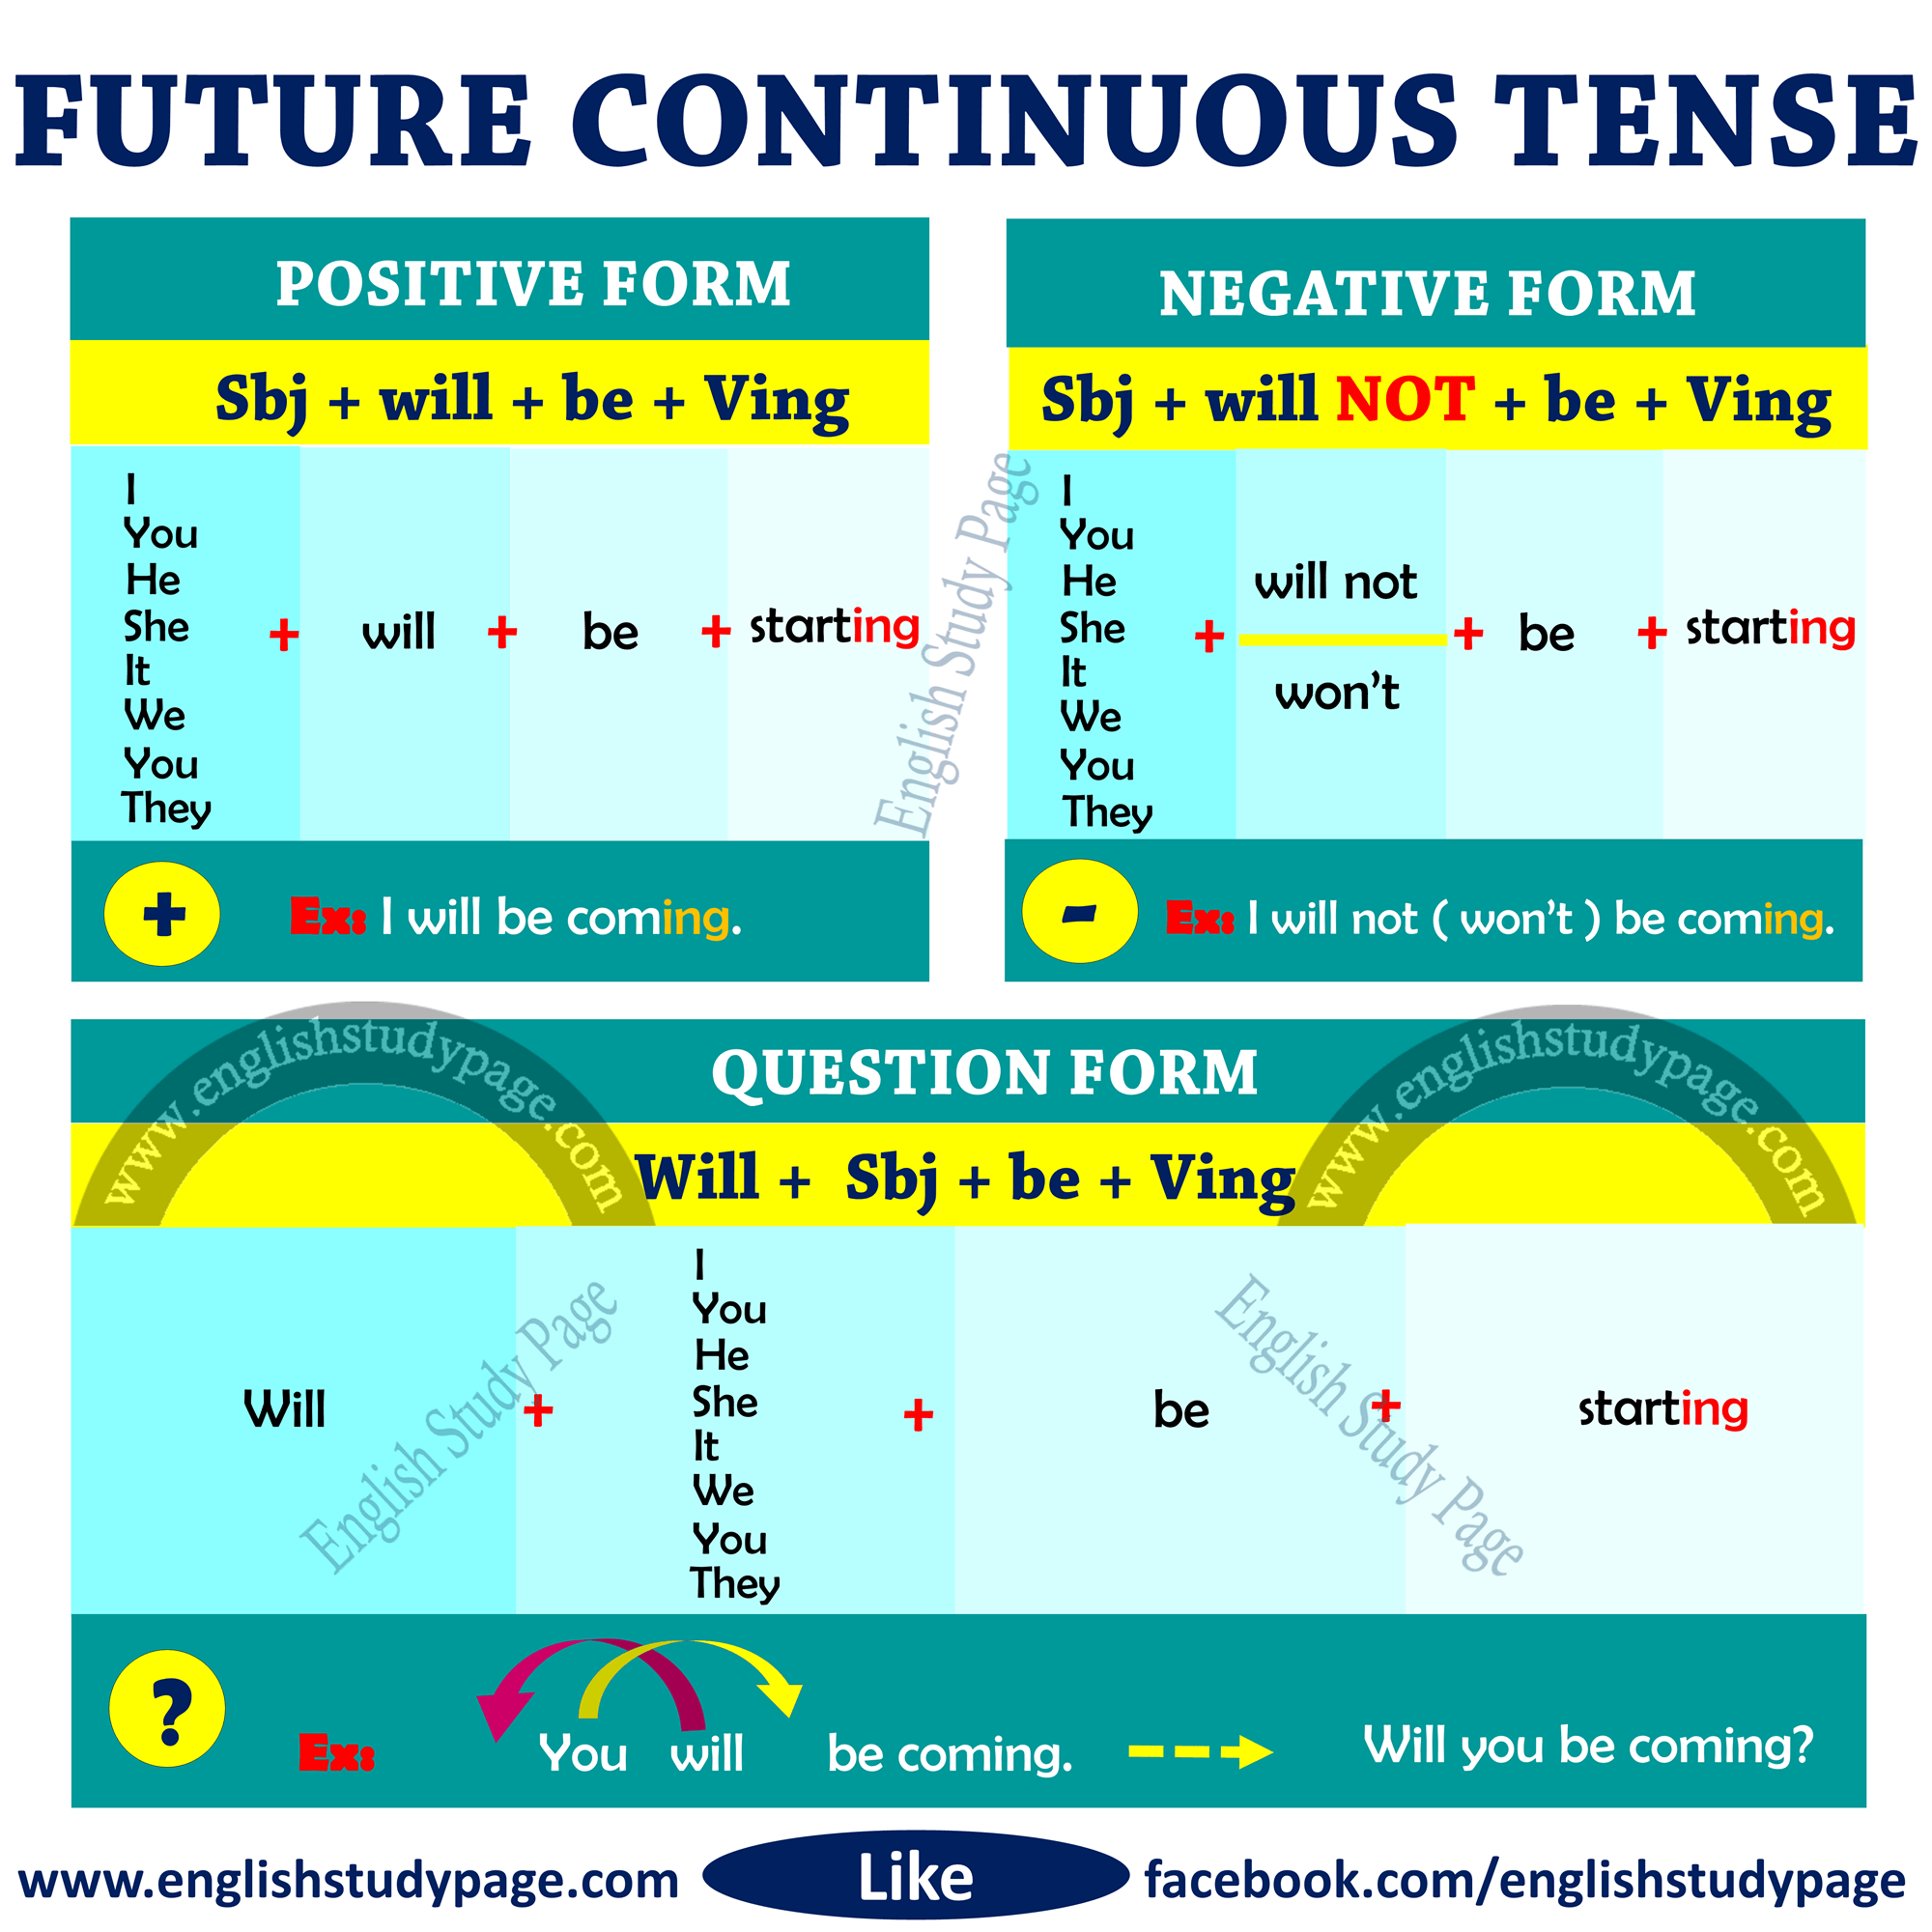 Structure of Future Continuous Tense